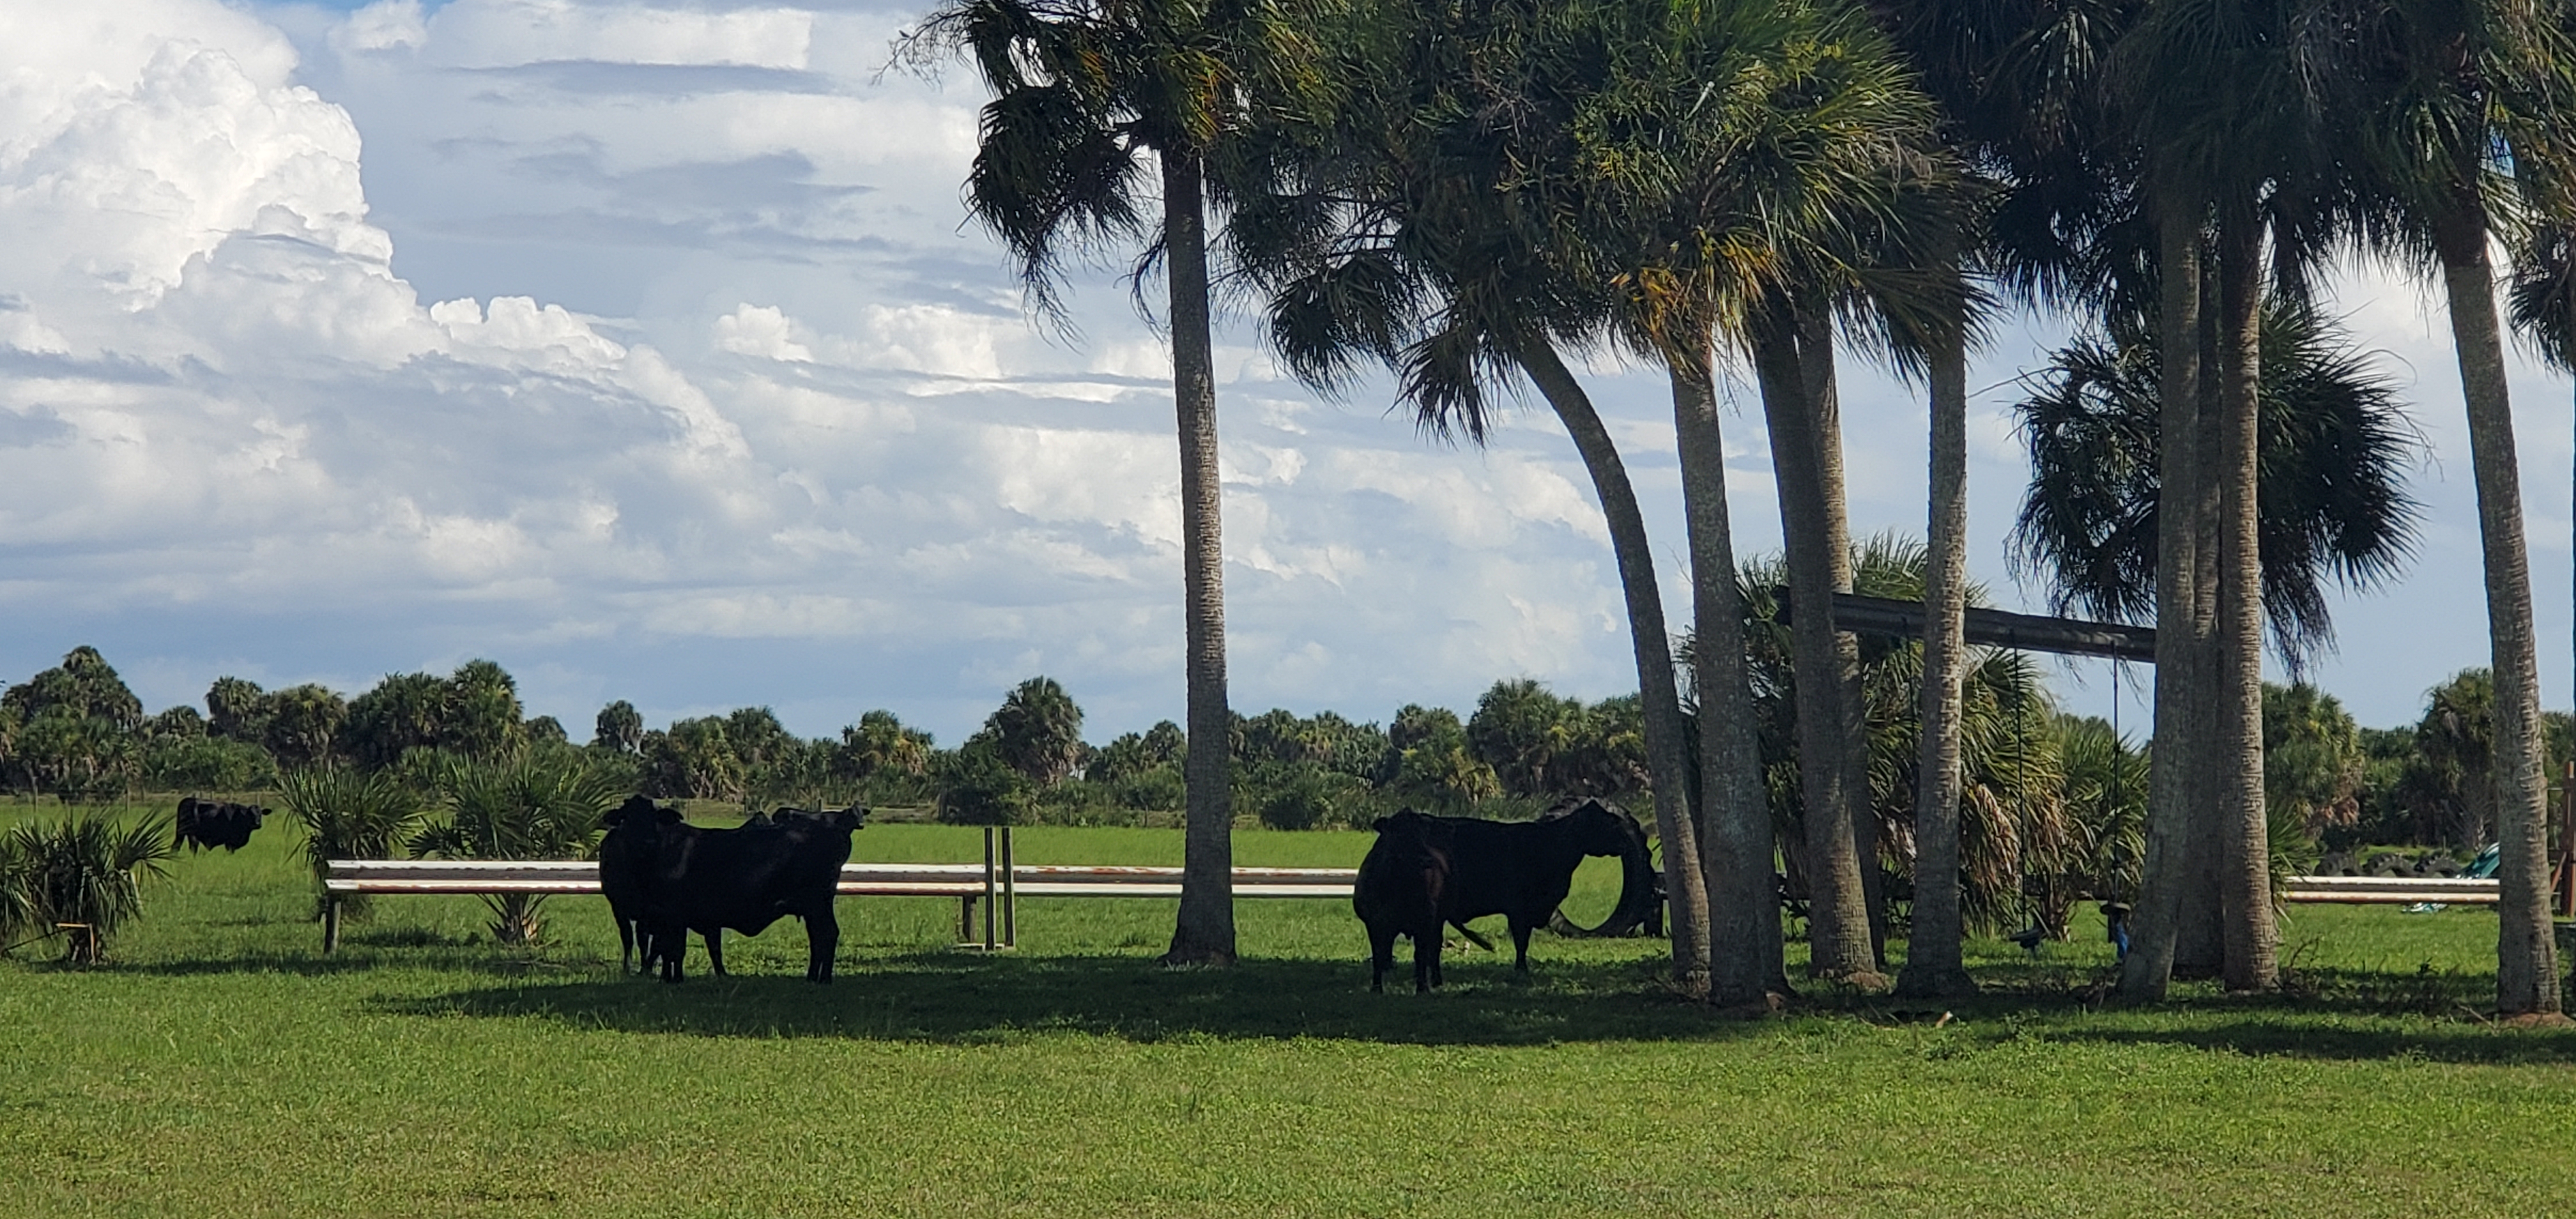 Long-eared cattle shading under palm trees